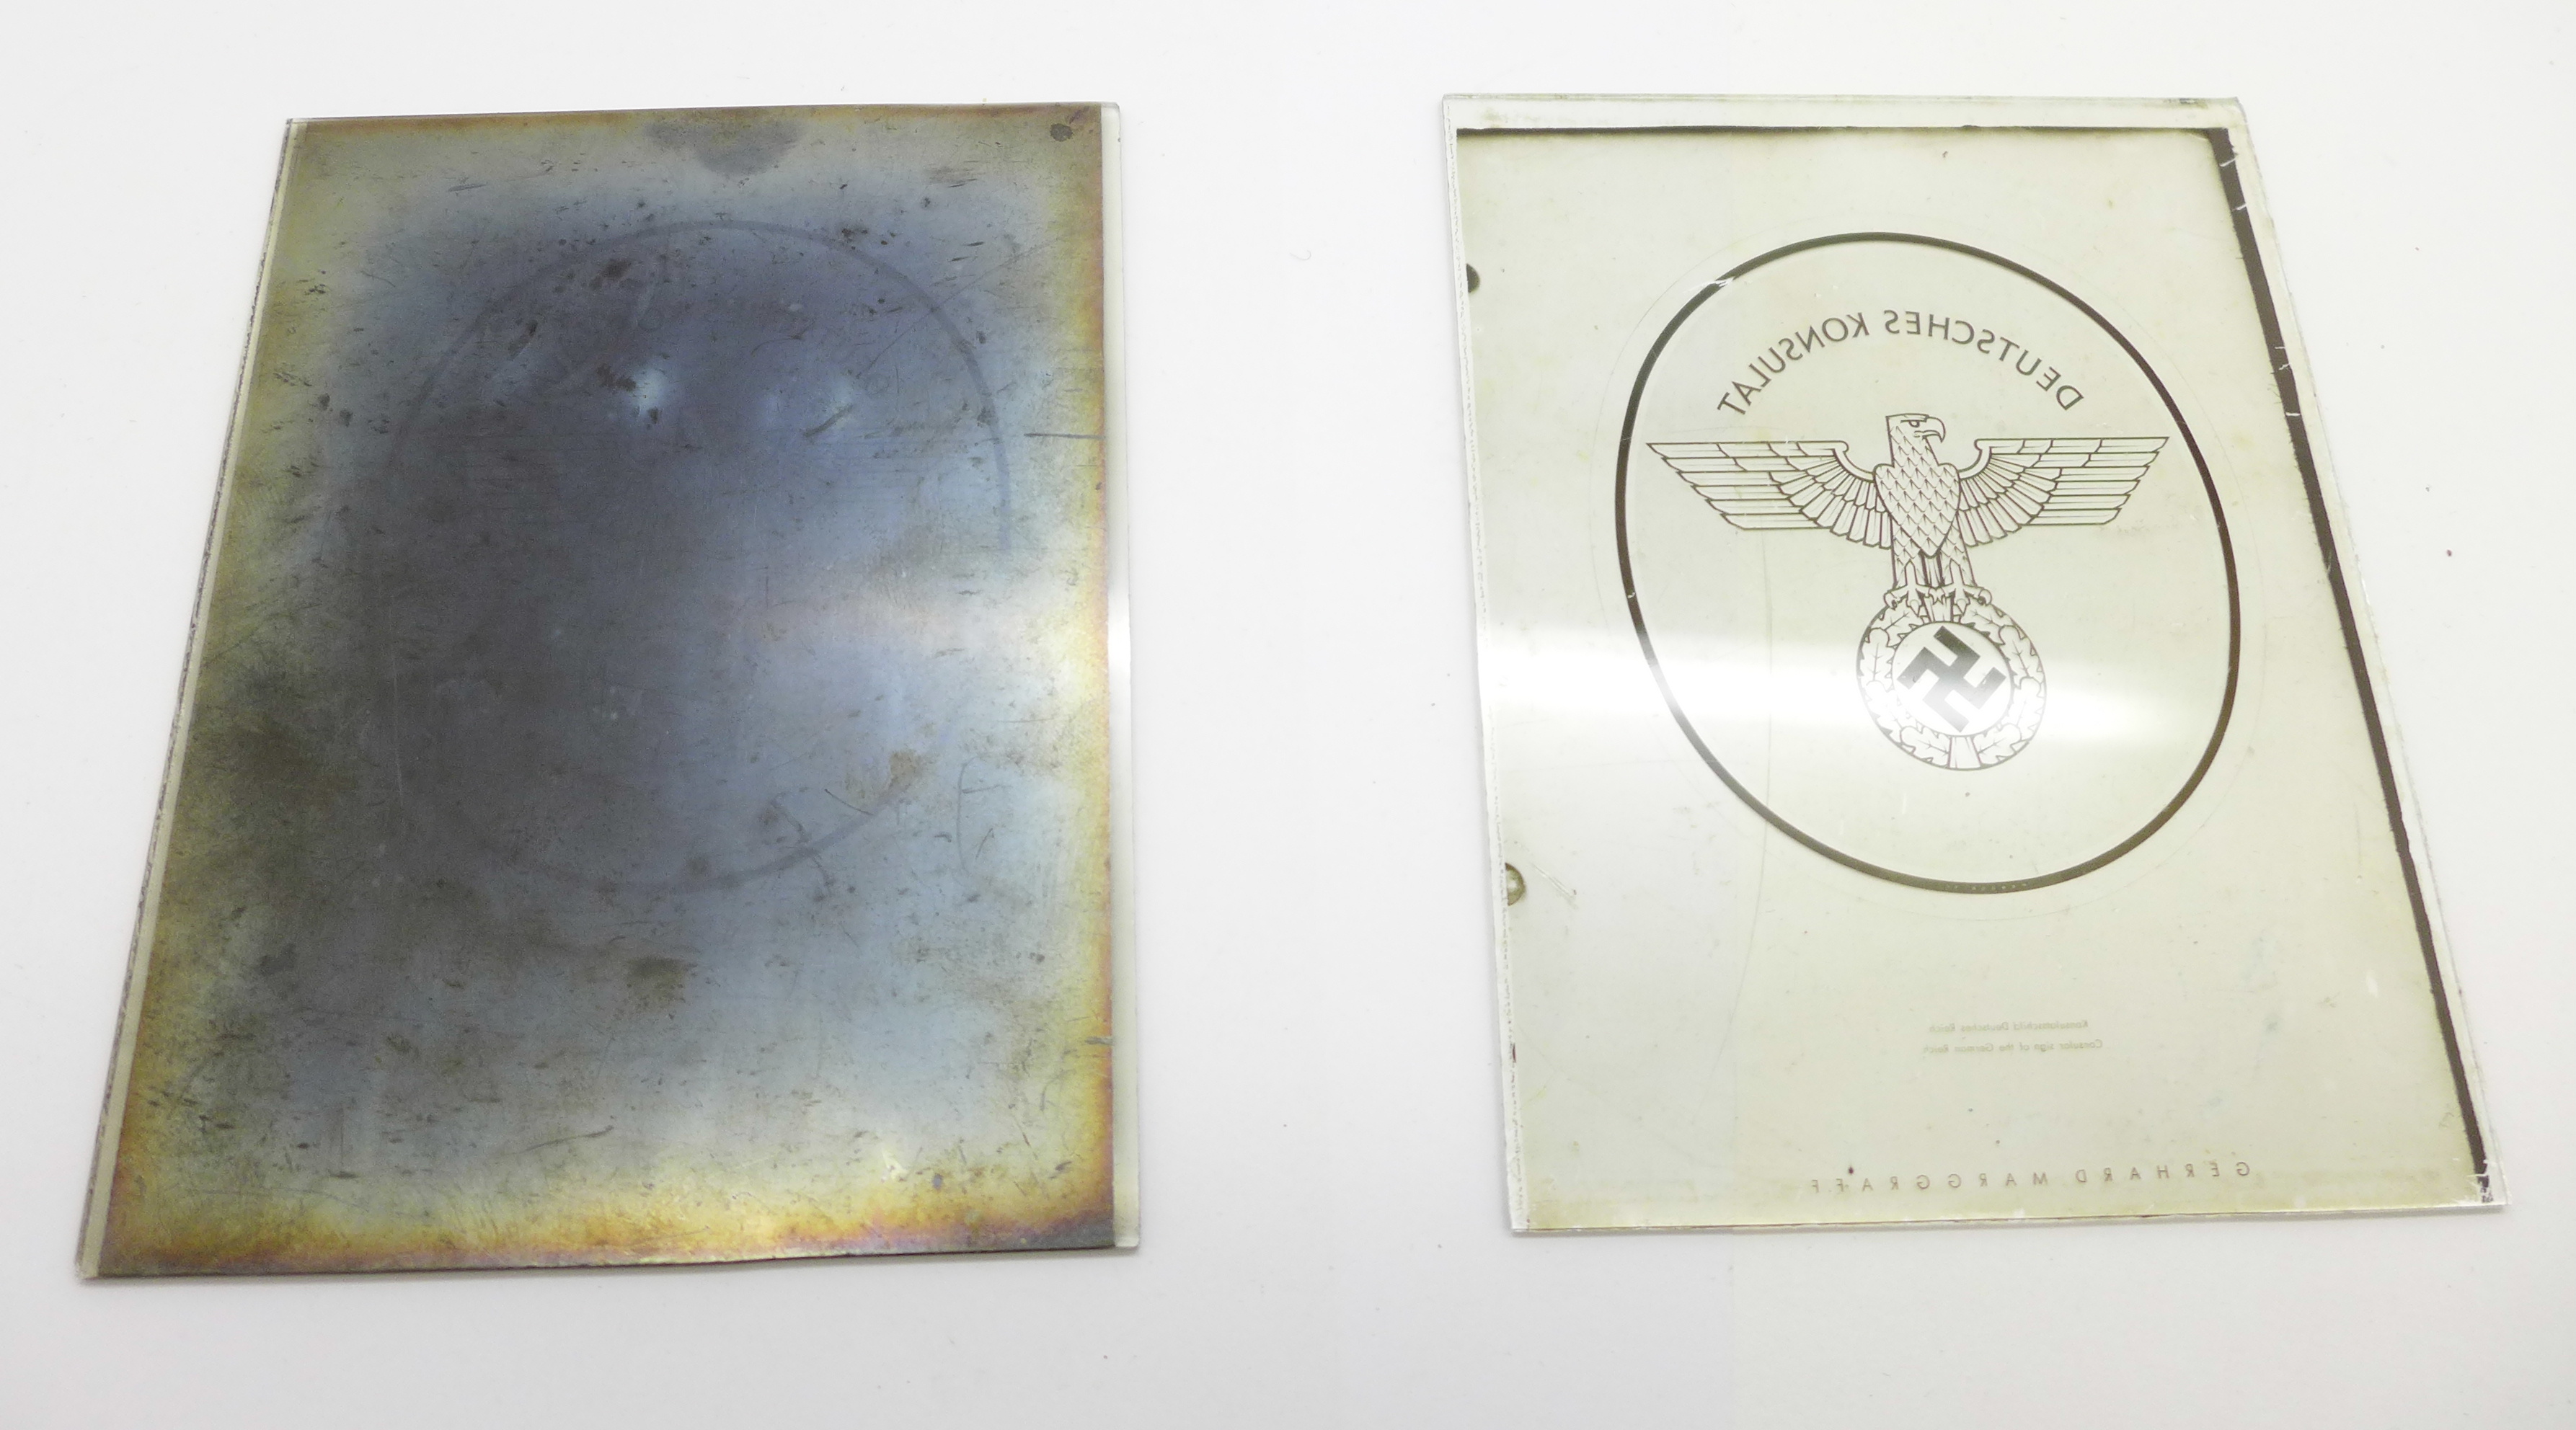 A glass plate Deutsches Konsulat (Germard Marggraff) also with negative plate - Image 2 of 2